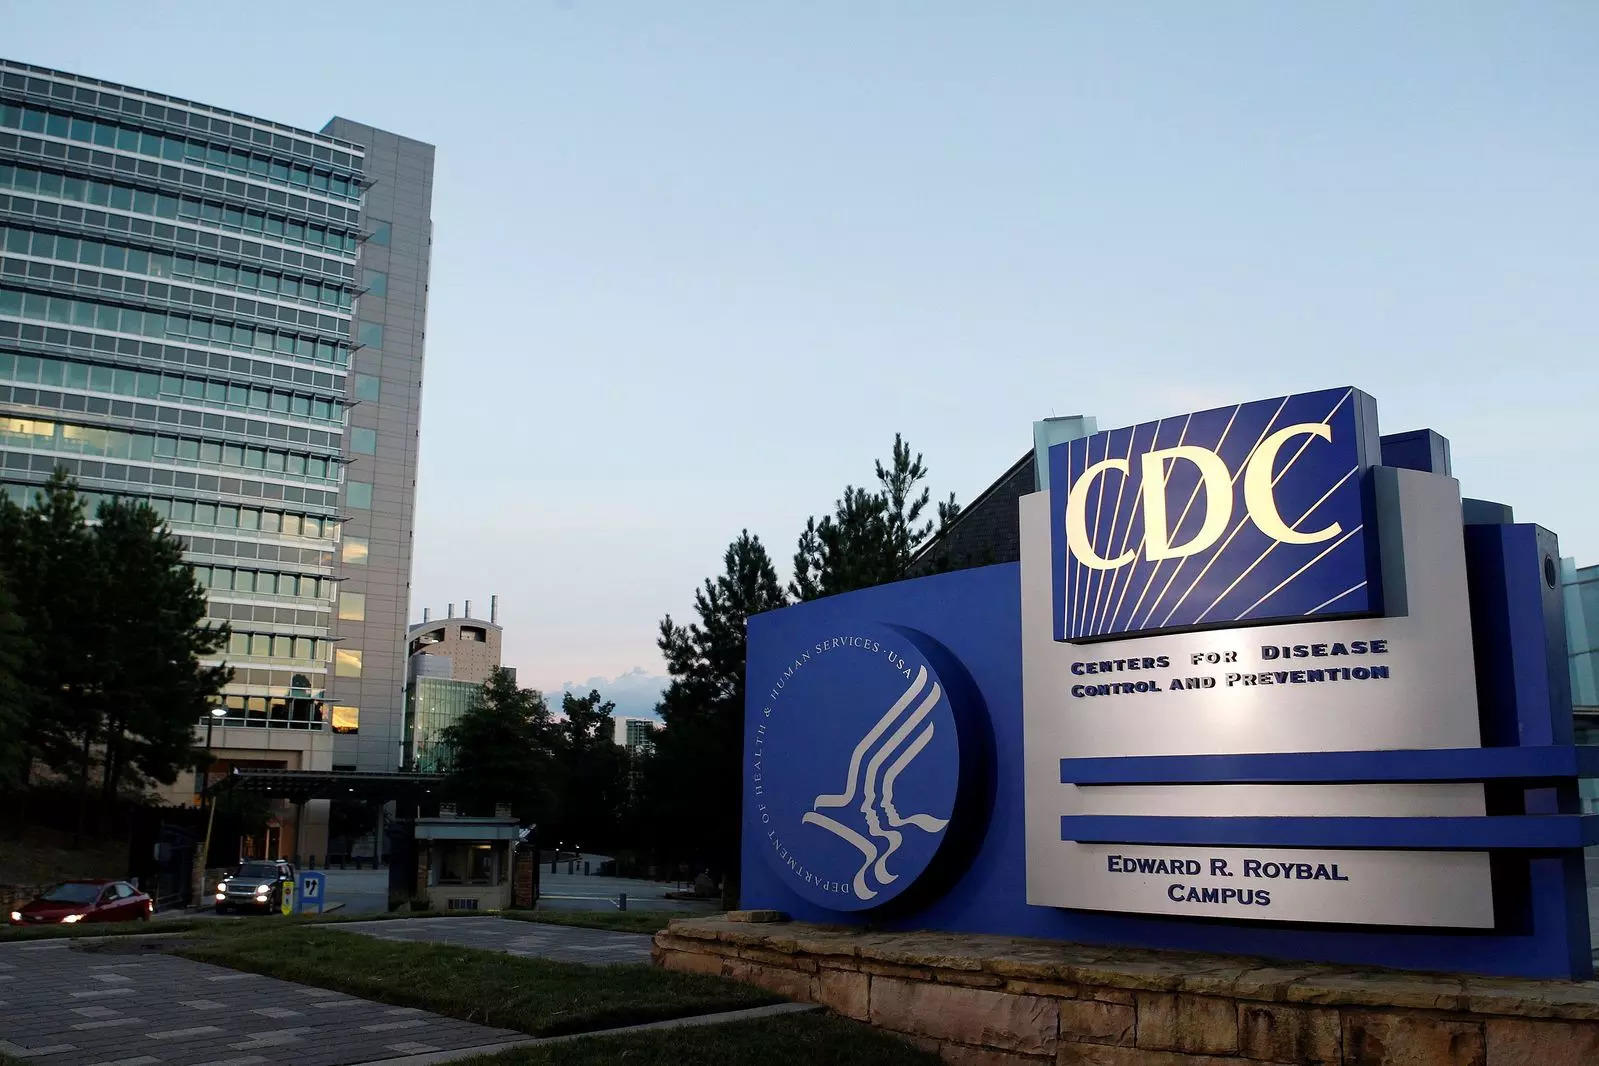 U.S. administers 442 mln doses of COVID-19 vaccines - CDC